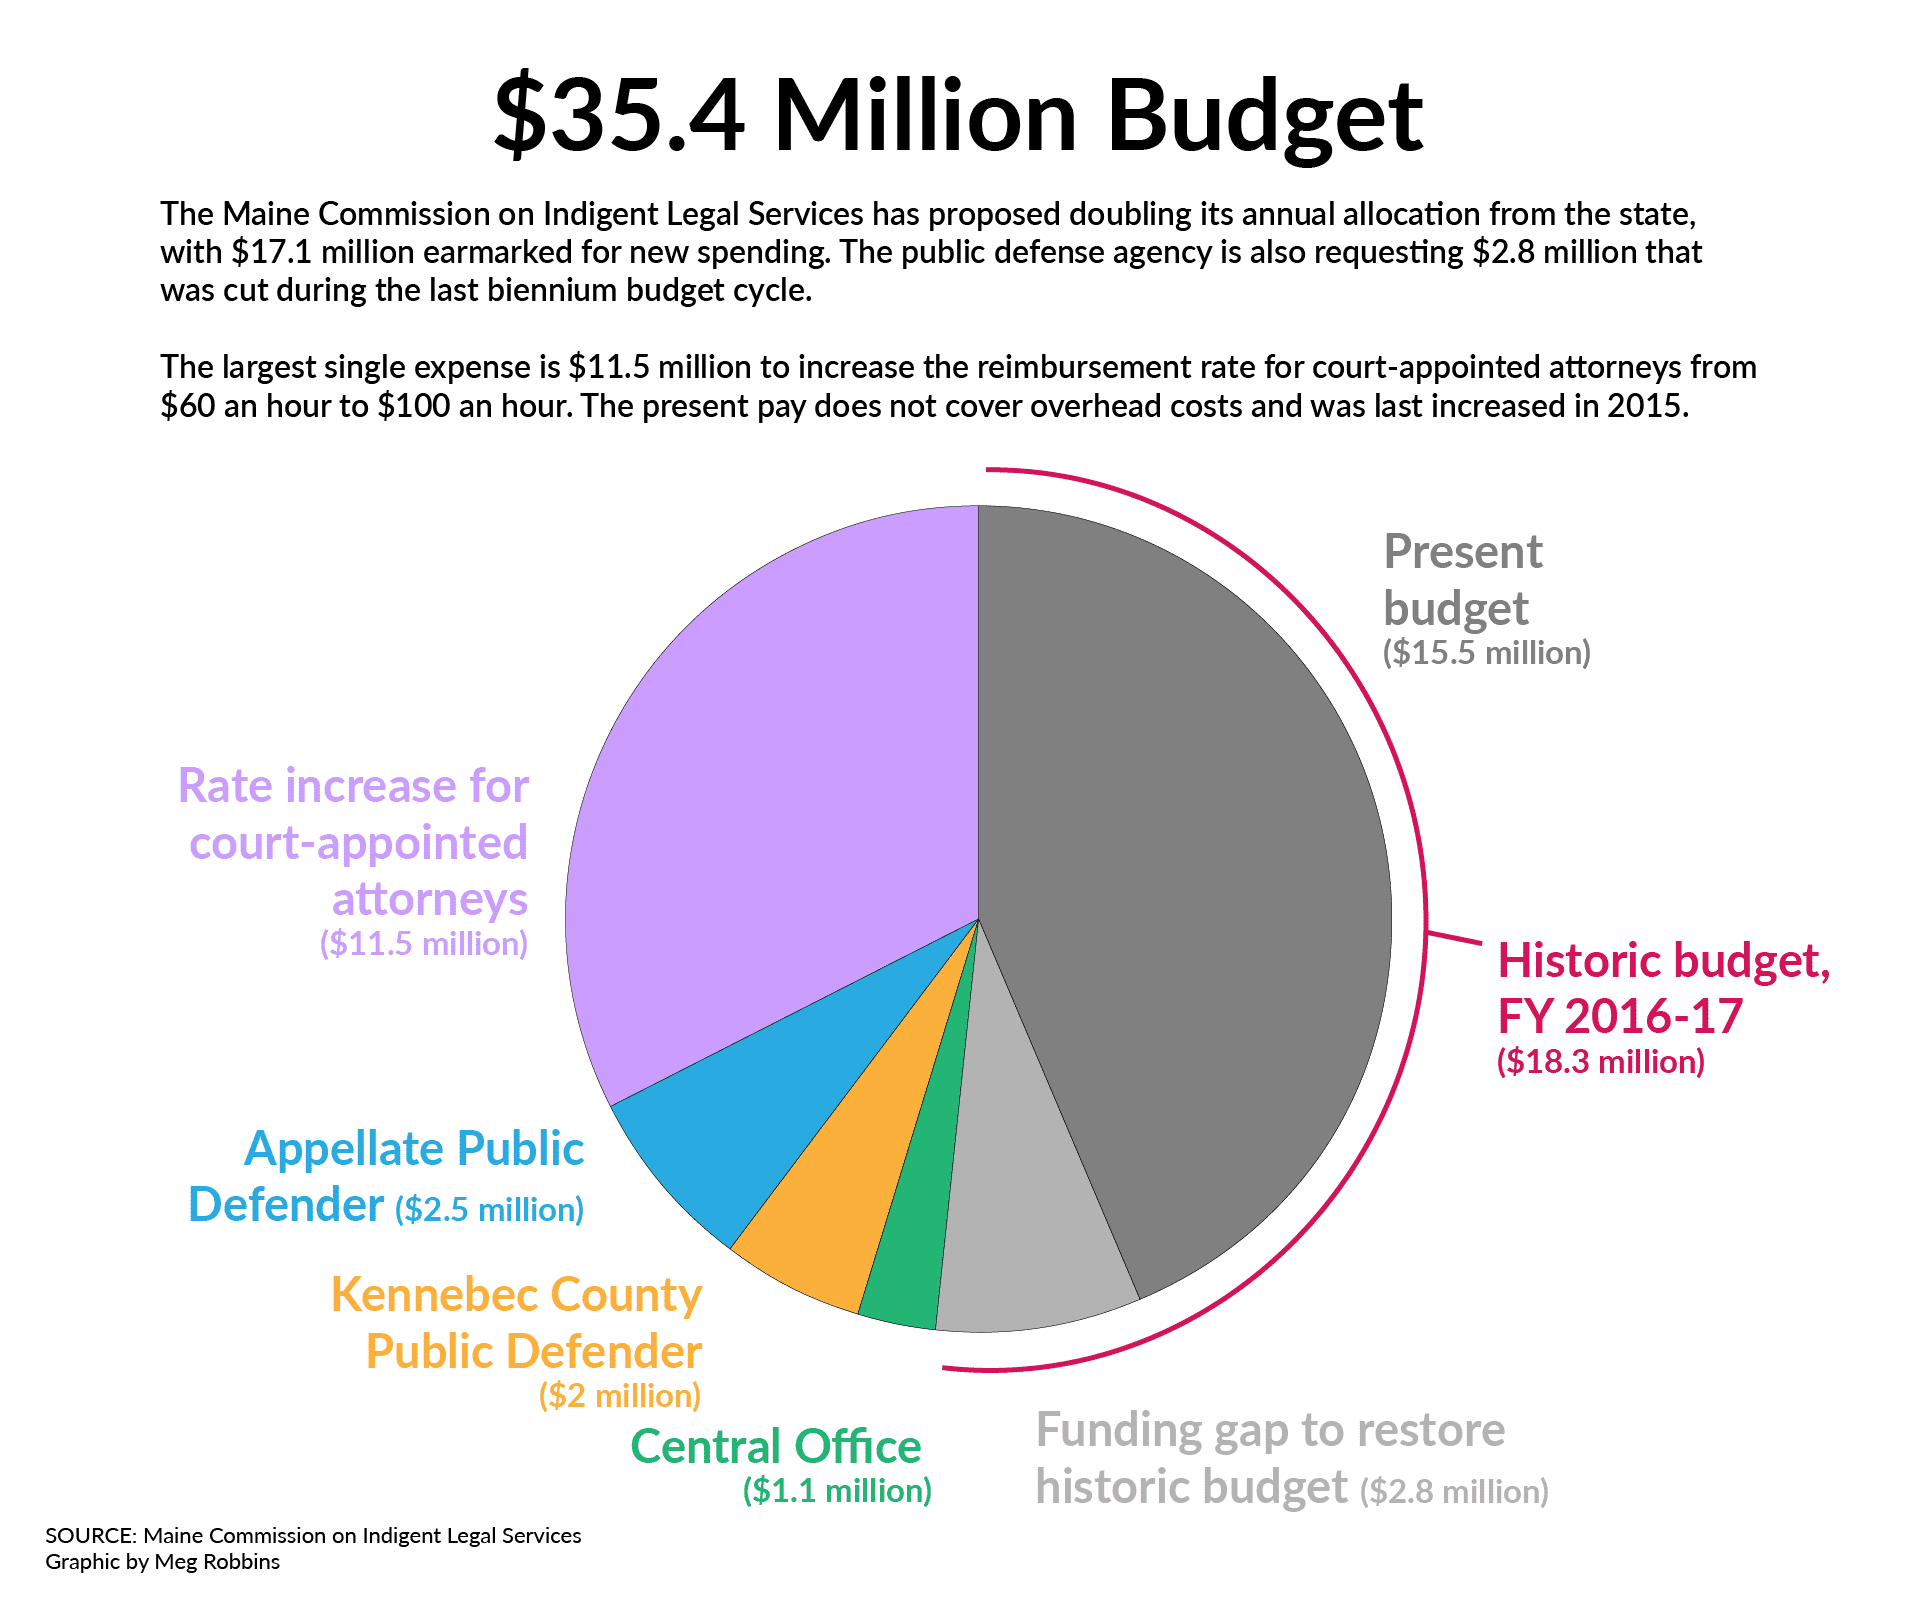 The Maine Commission on Indigent Legal Services has proposed doubling its annual allocation from the state, with $17.1 million earmarked for new spending. The public defense agency is also requesting $2.8 million that was cut during the last biennium budget cycle.